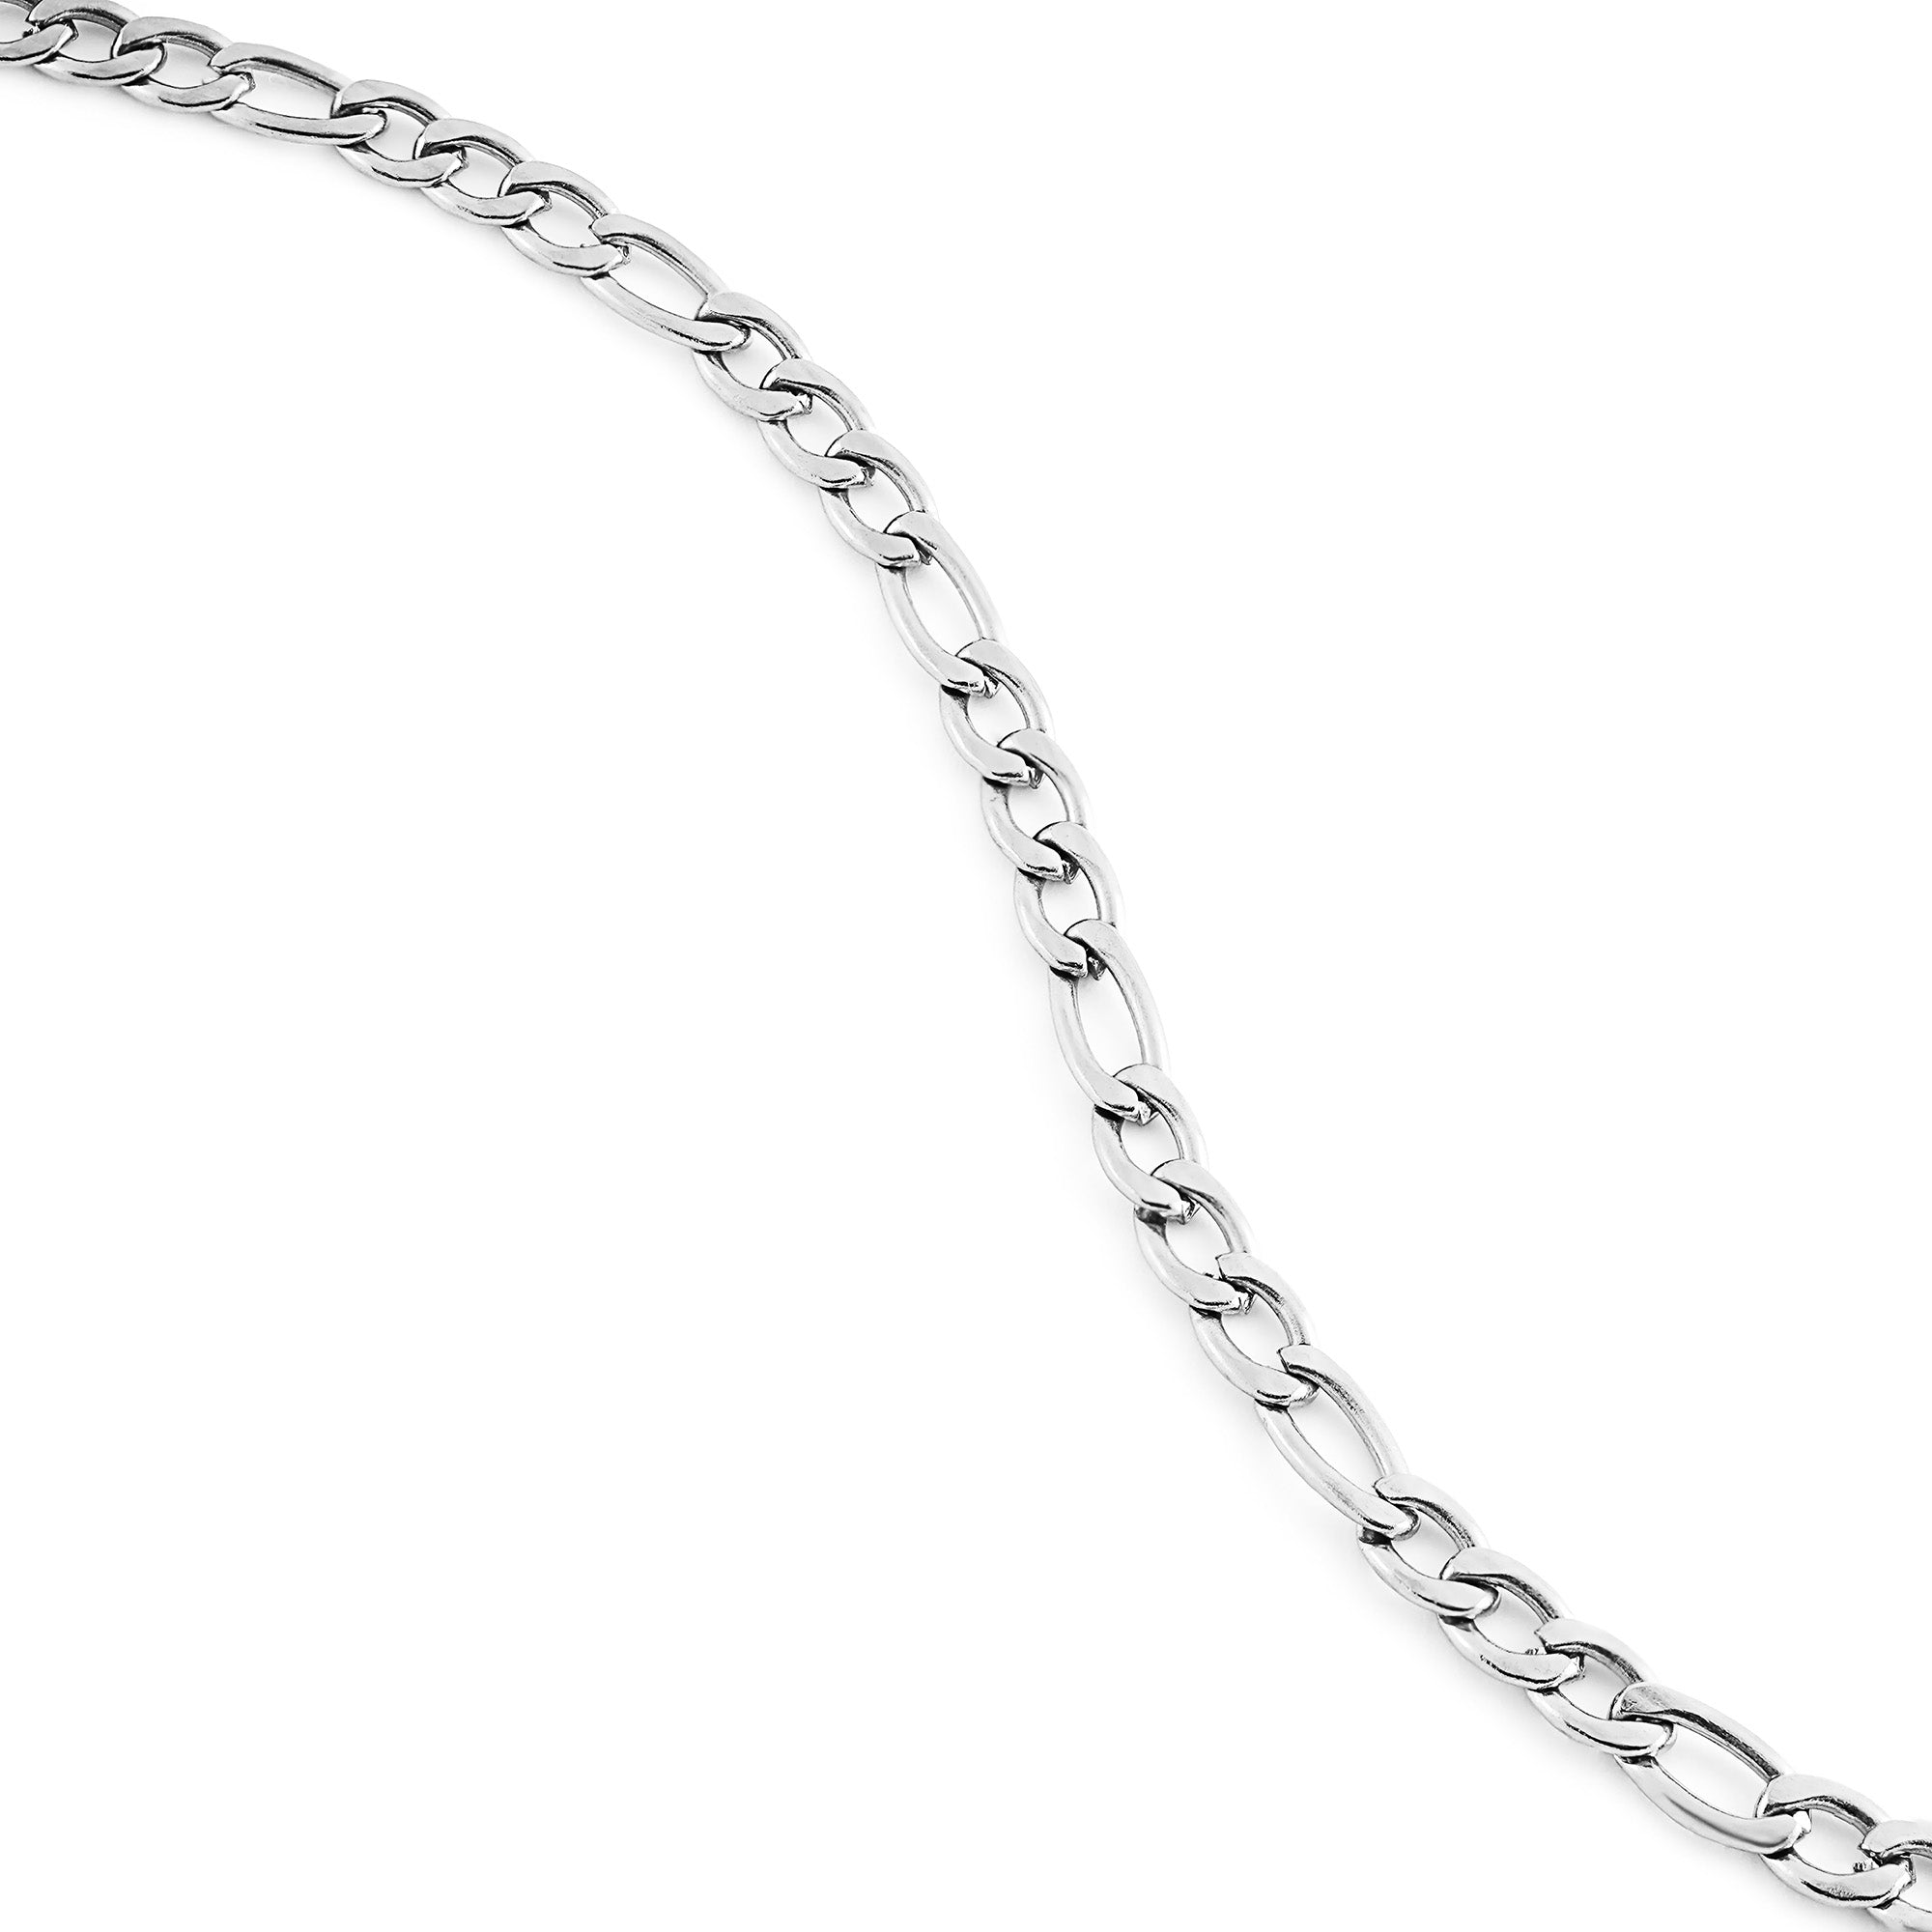 Valencia women's bracelet by Five Jwlry, crafted from a 4mm figaro chain in silver-colored, water-resistant 316L stainless steel. Available in size 16cm with a 4cm extension. Hypoallergenic with a 2-year warranty.